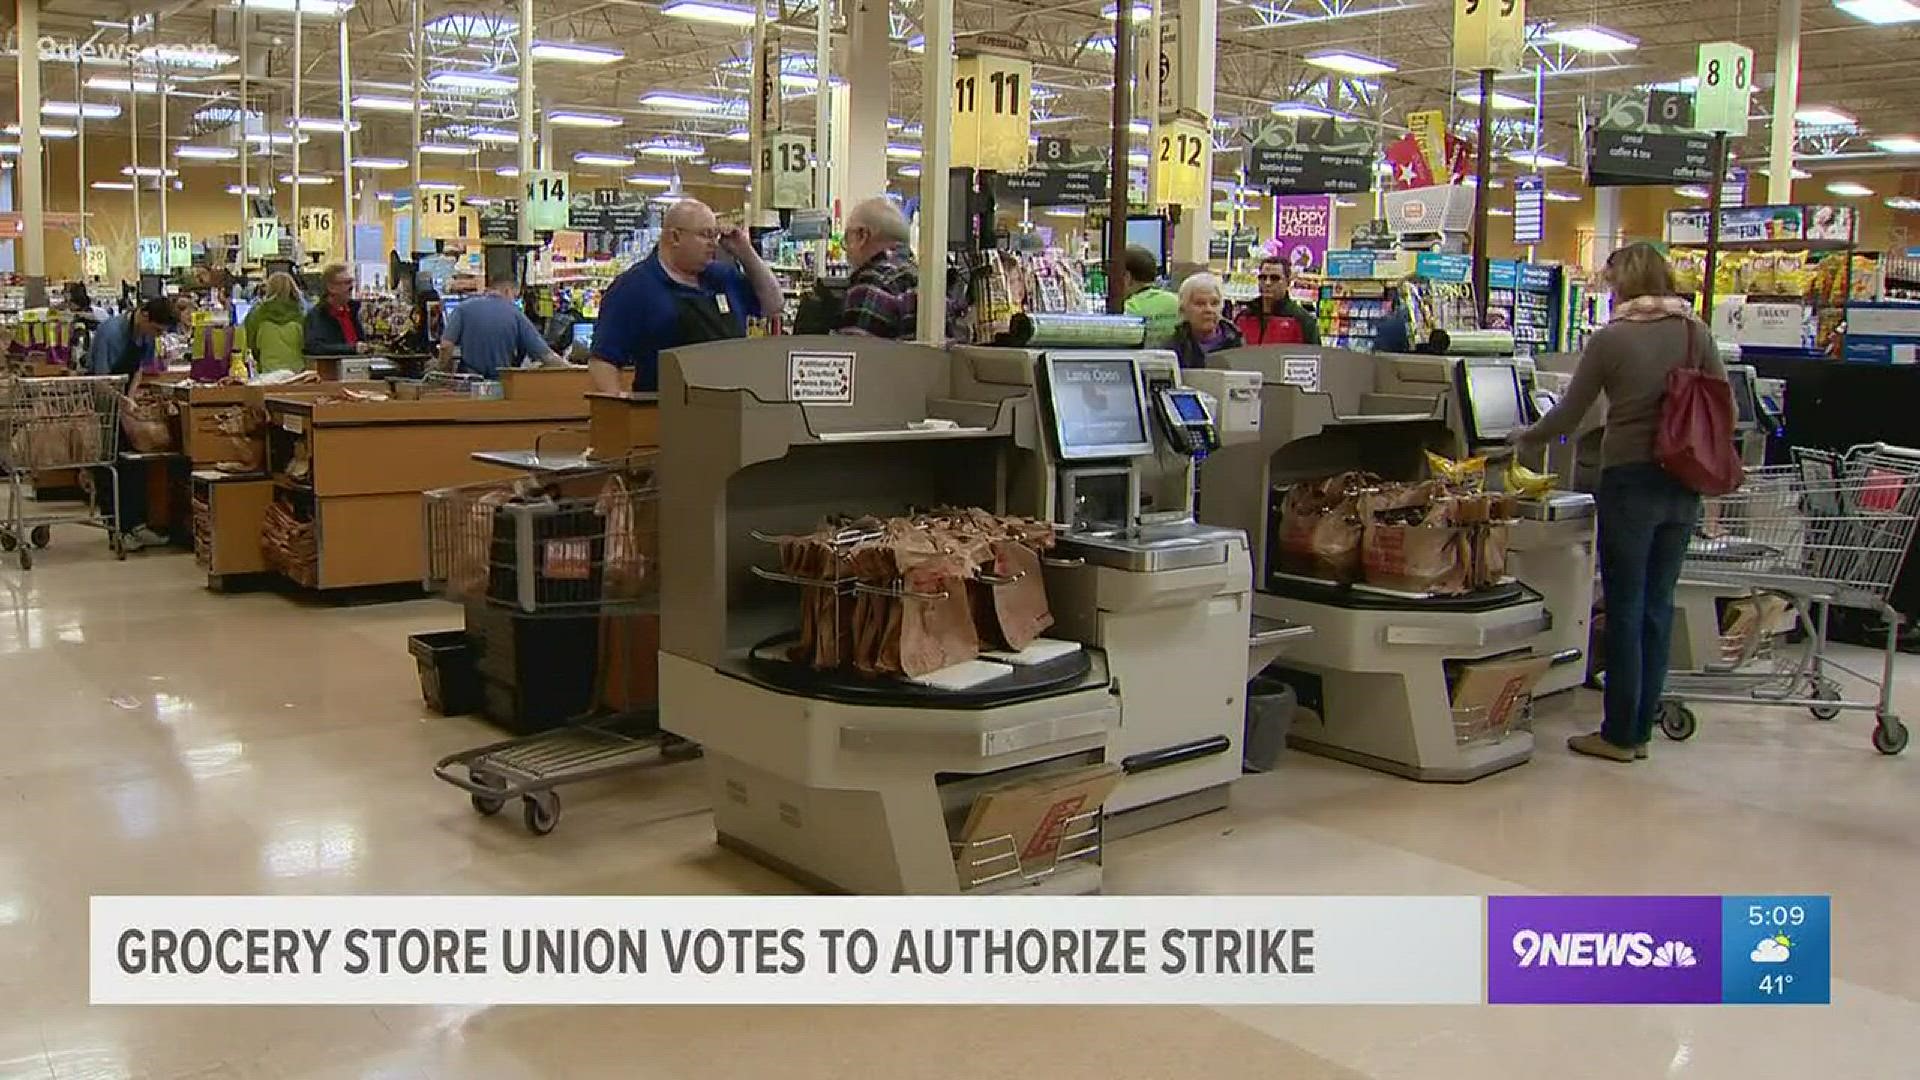 UFCW Local 7 says the authorization allows union leadership to call for a strike at any time.